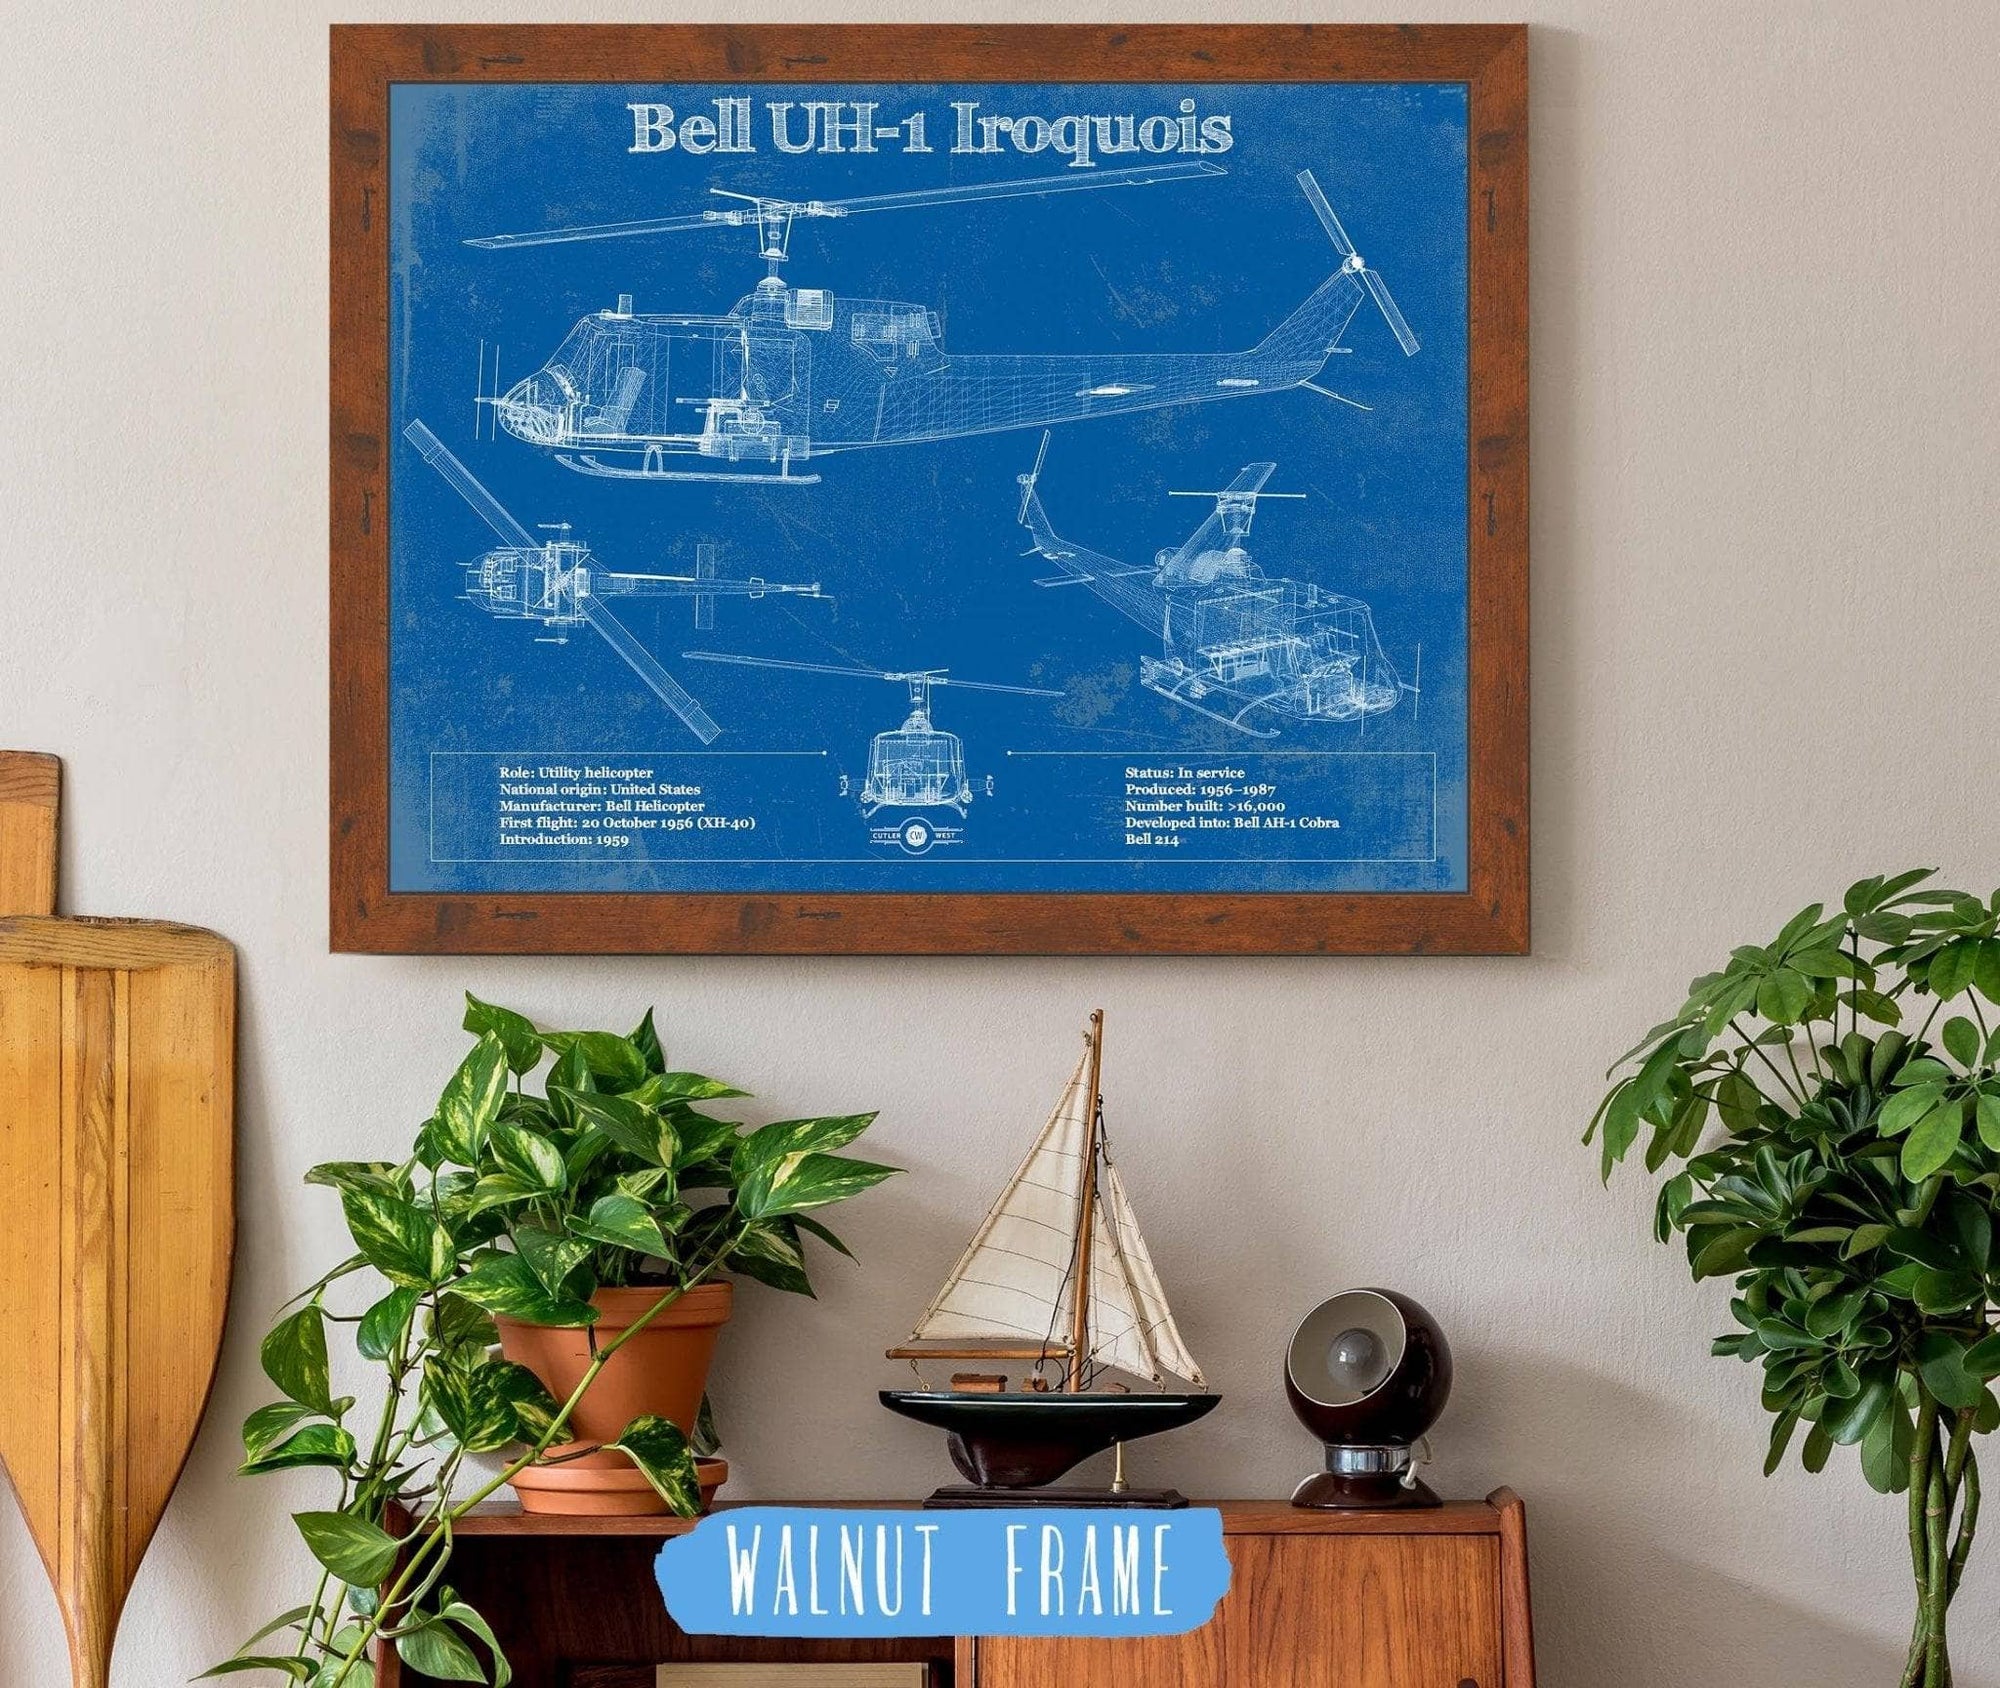 Cutler West Military Aircraft 14" x 11" / Walnut Frame Bell UH-1 Iroquois (Huey) Vintage Blueprint Helicopter Print 833110167_35342